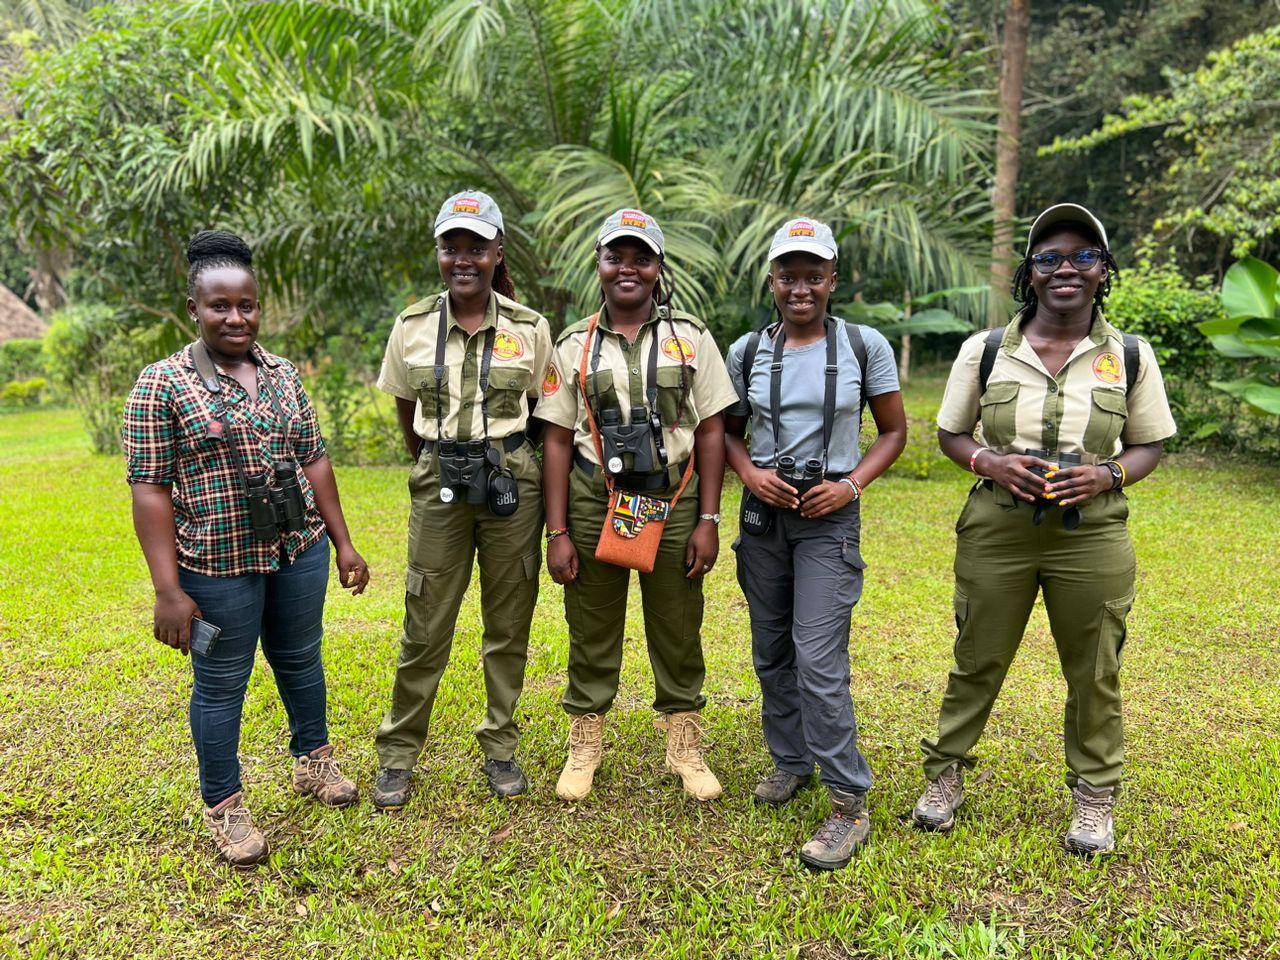 Uganda Women Birders tackles limiting gender taboos by giving women the experience and resources they need to prove they can do the job.